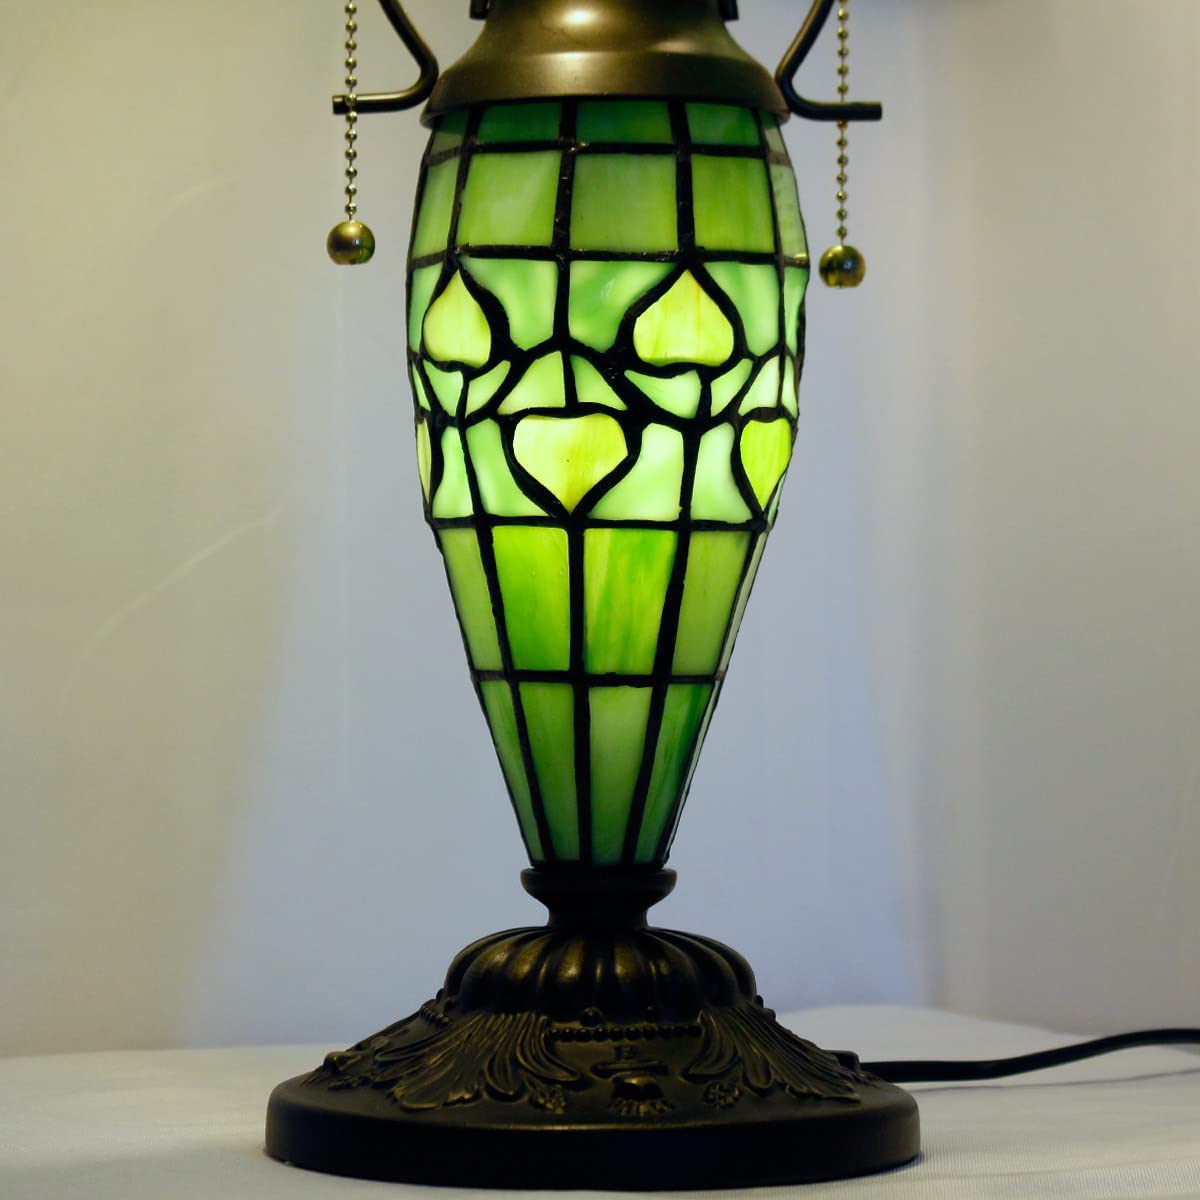 Werfactory® Tiffany Table Lamp 3-Light 24 Inch High Green Stained Glass Mother Daughter Table Lamp